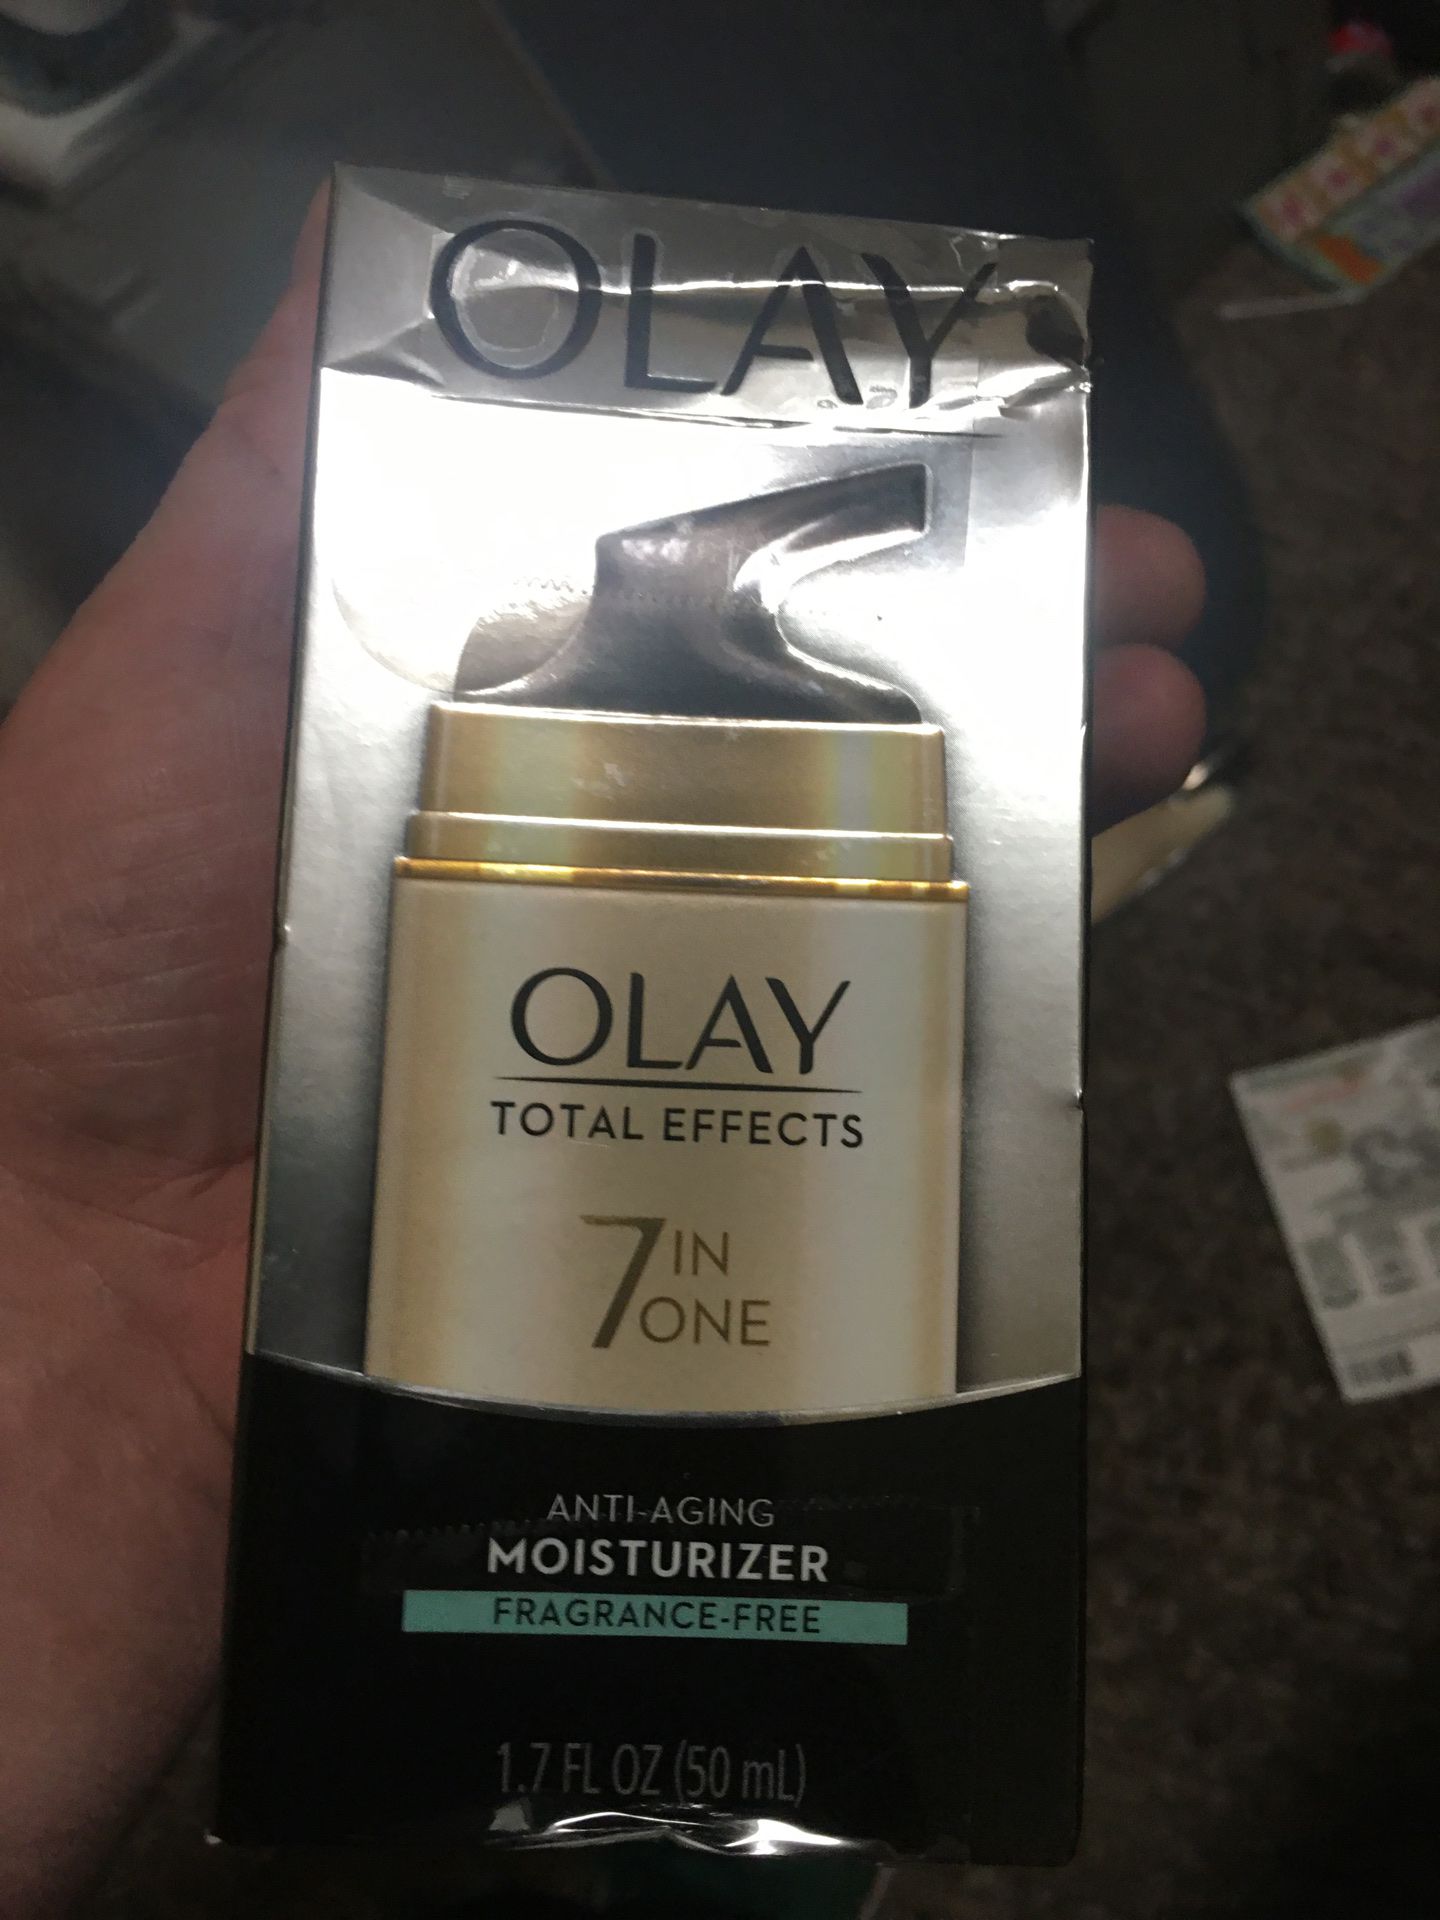 Olay Total Effects 7in1 Anti-Aging Moisturizer